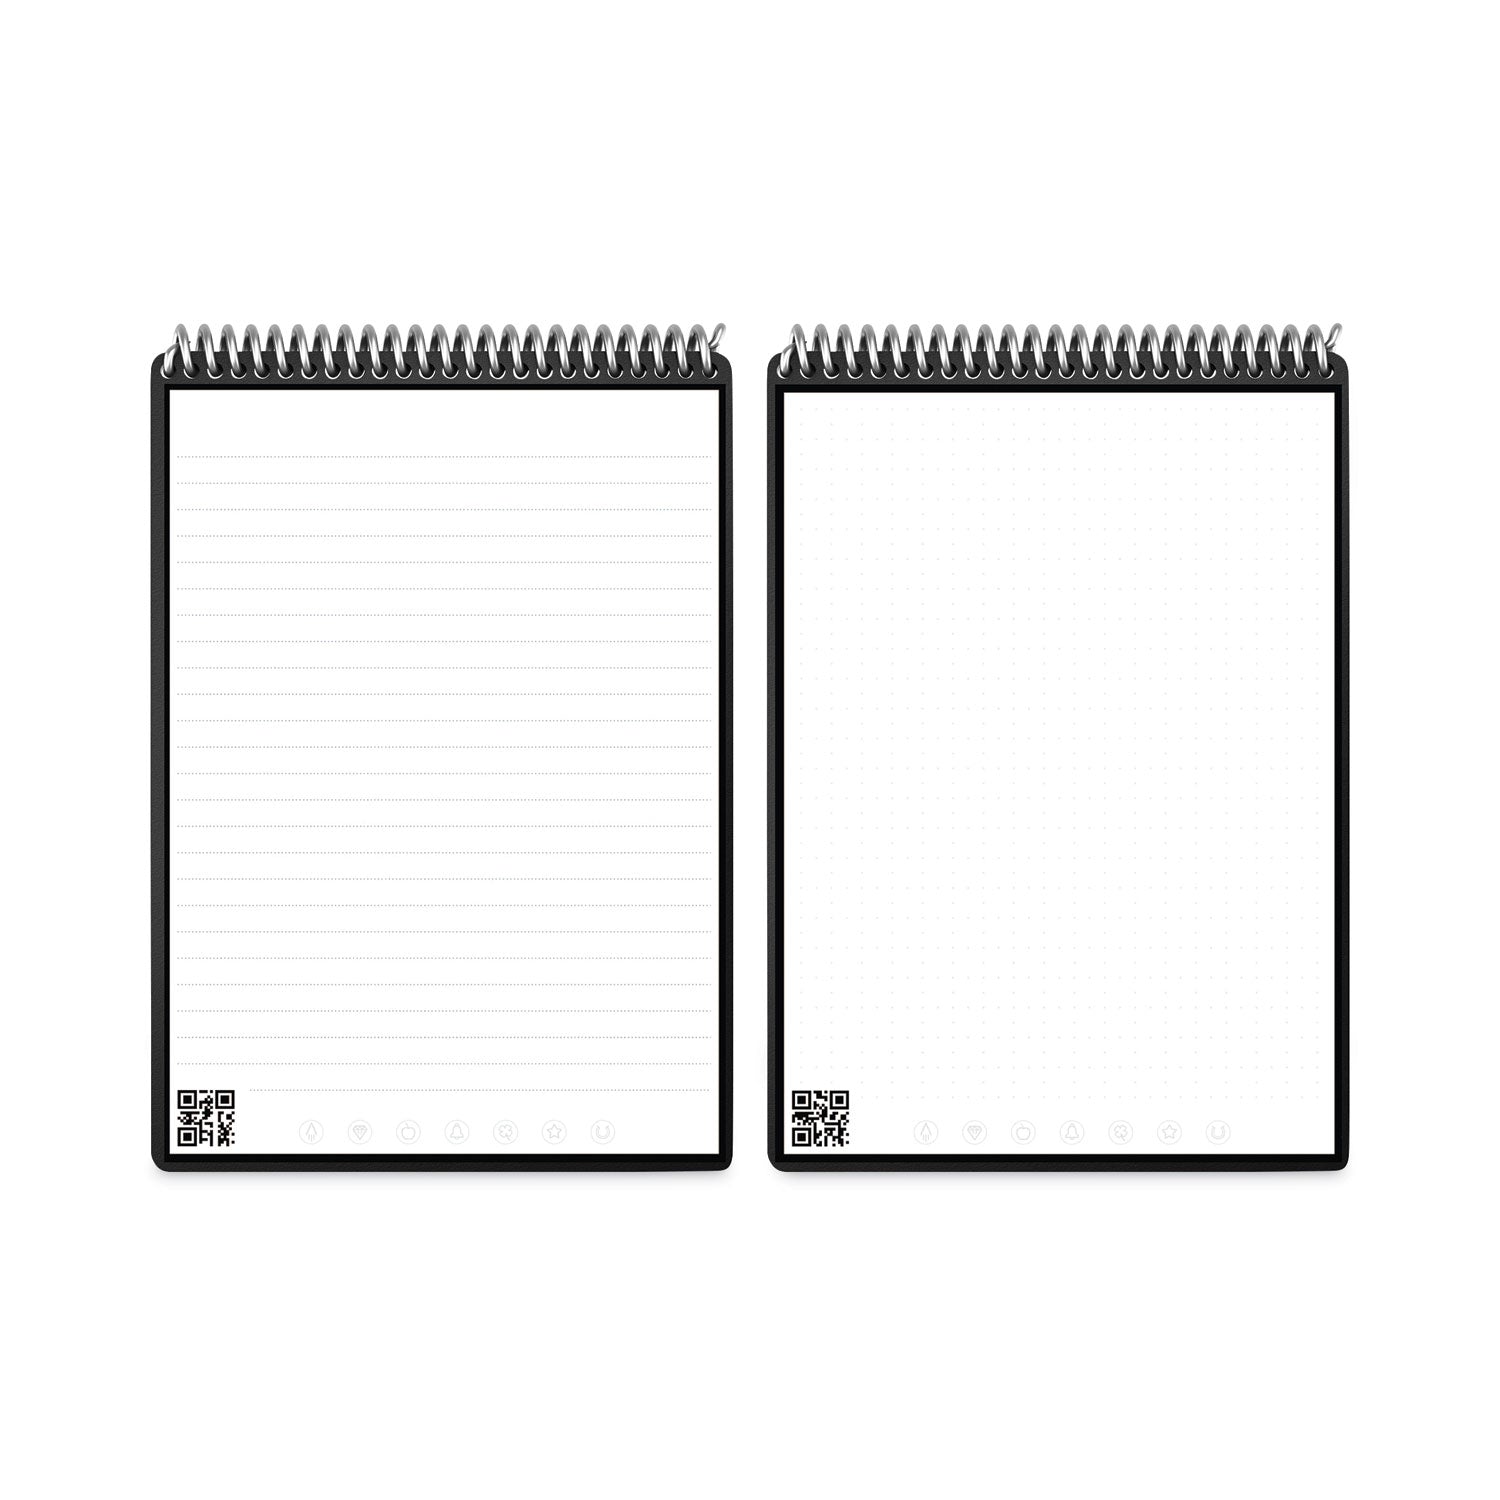 flip-smart-notepad-teal-cover-lined-dot-grid-rule-85-x-11-white-16-sheets_rkbflplrccce - 2